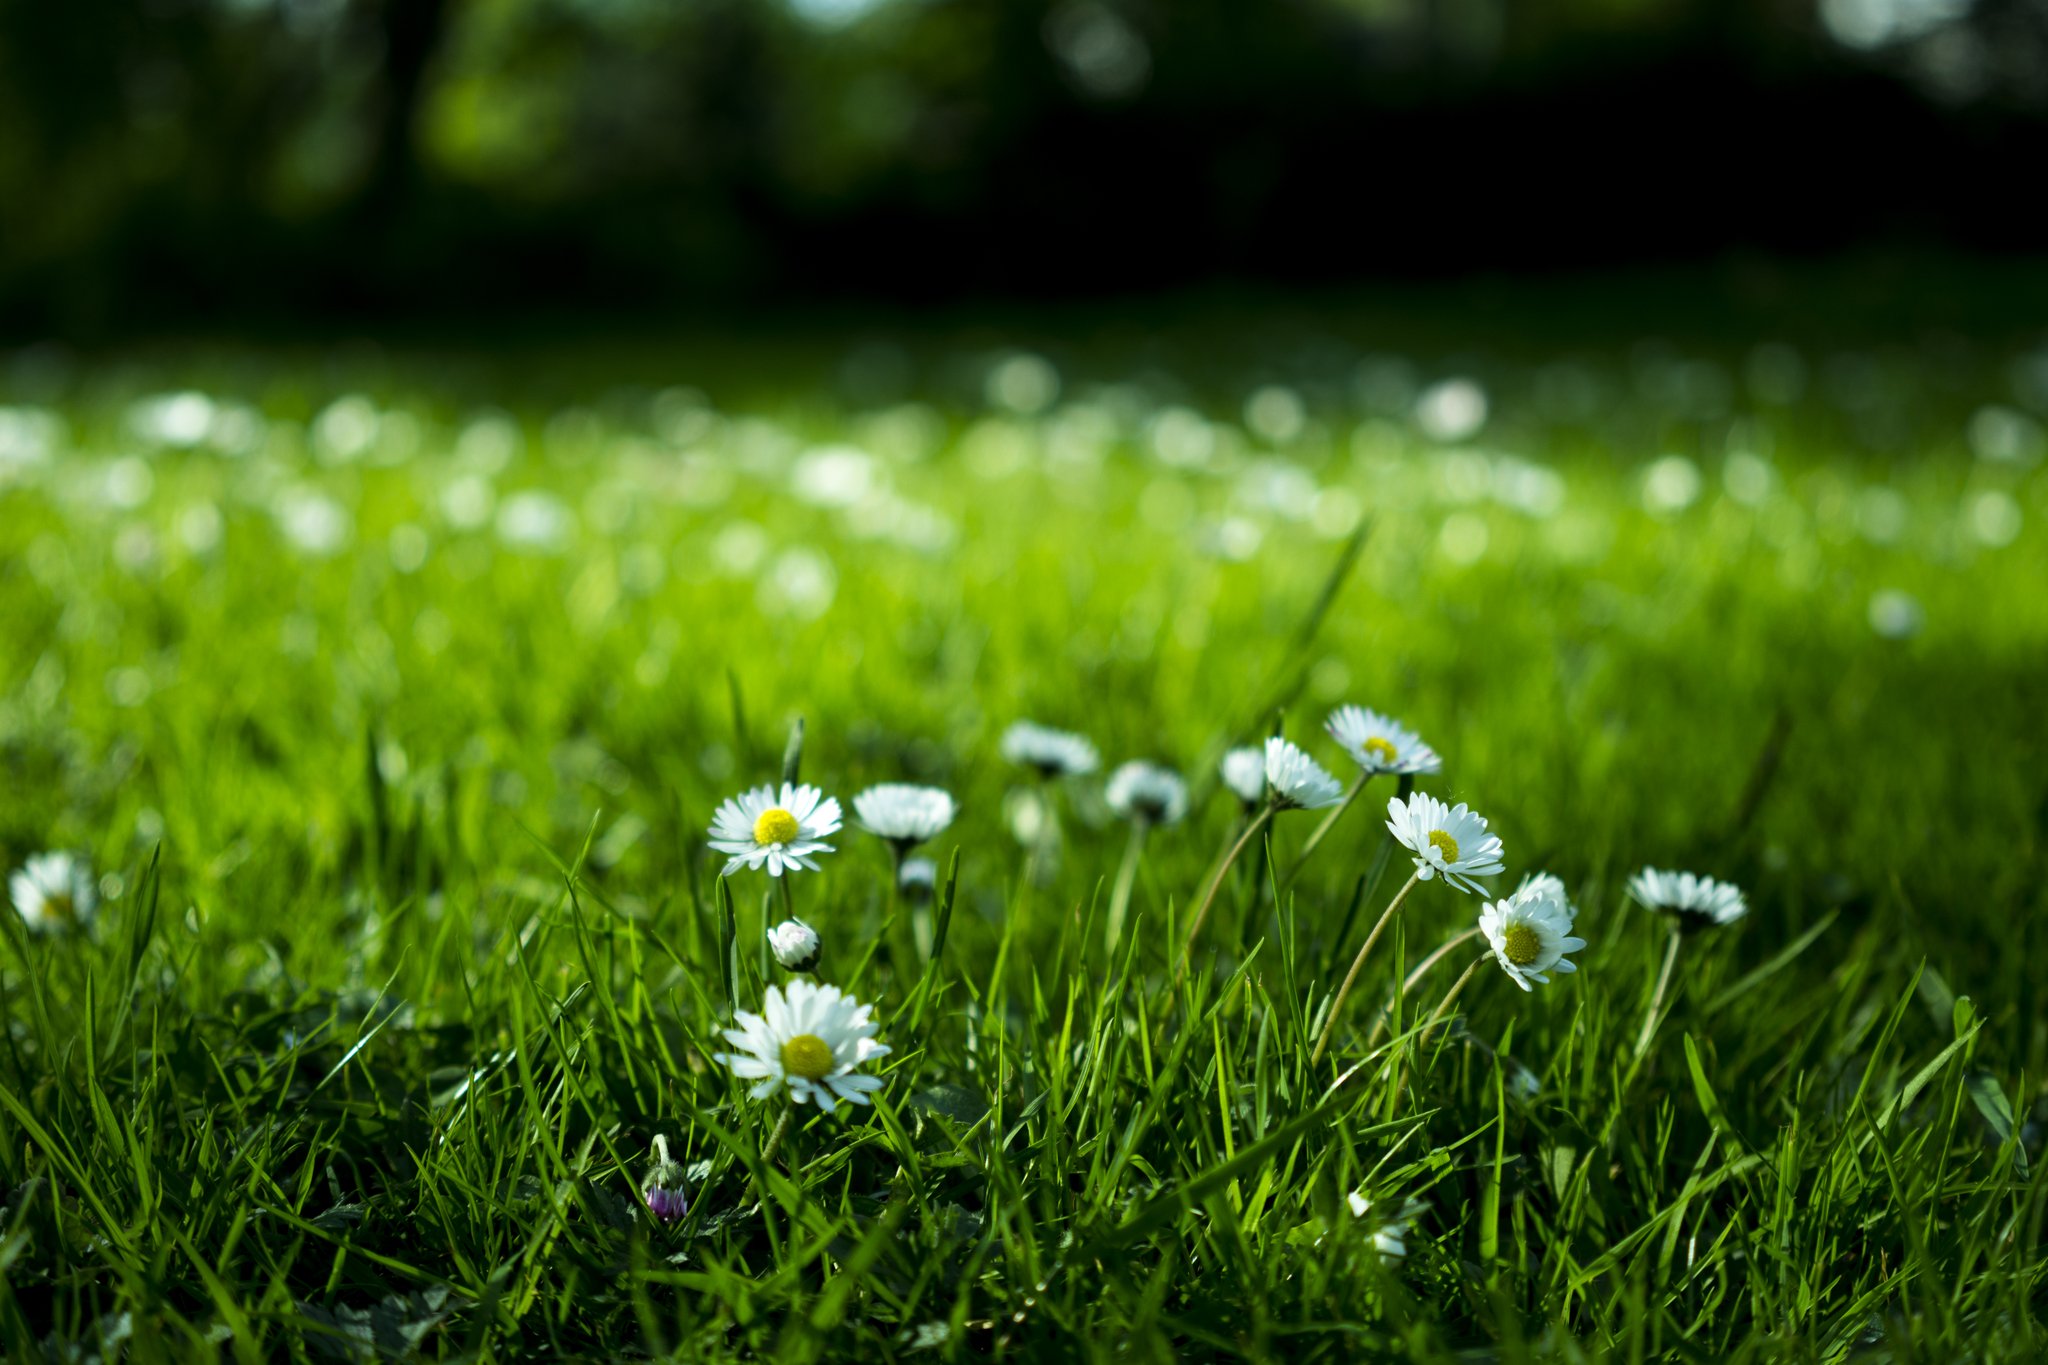 How to Get Rid of Weeds Without Killing Your Lawn | POPSUGAR Home